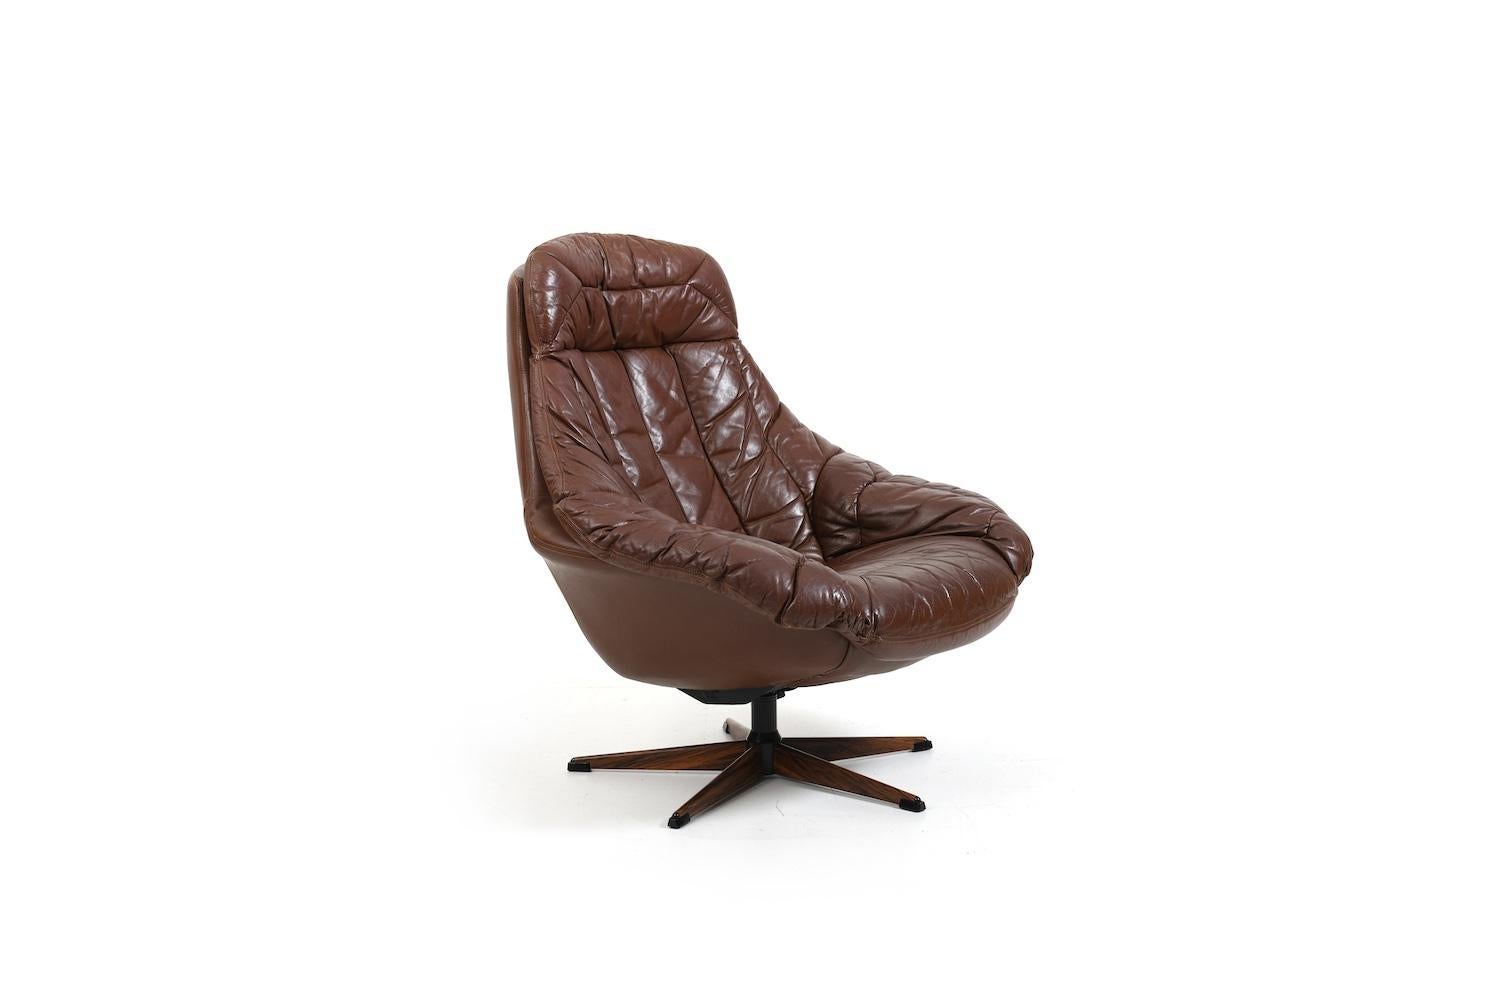 Henry W. Klein for Bramin Denmark, 1960s brown leather lounge chair with tilt and rotation function. Chromed base.